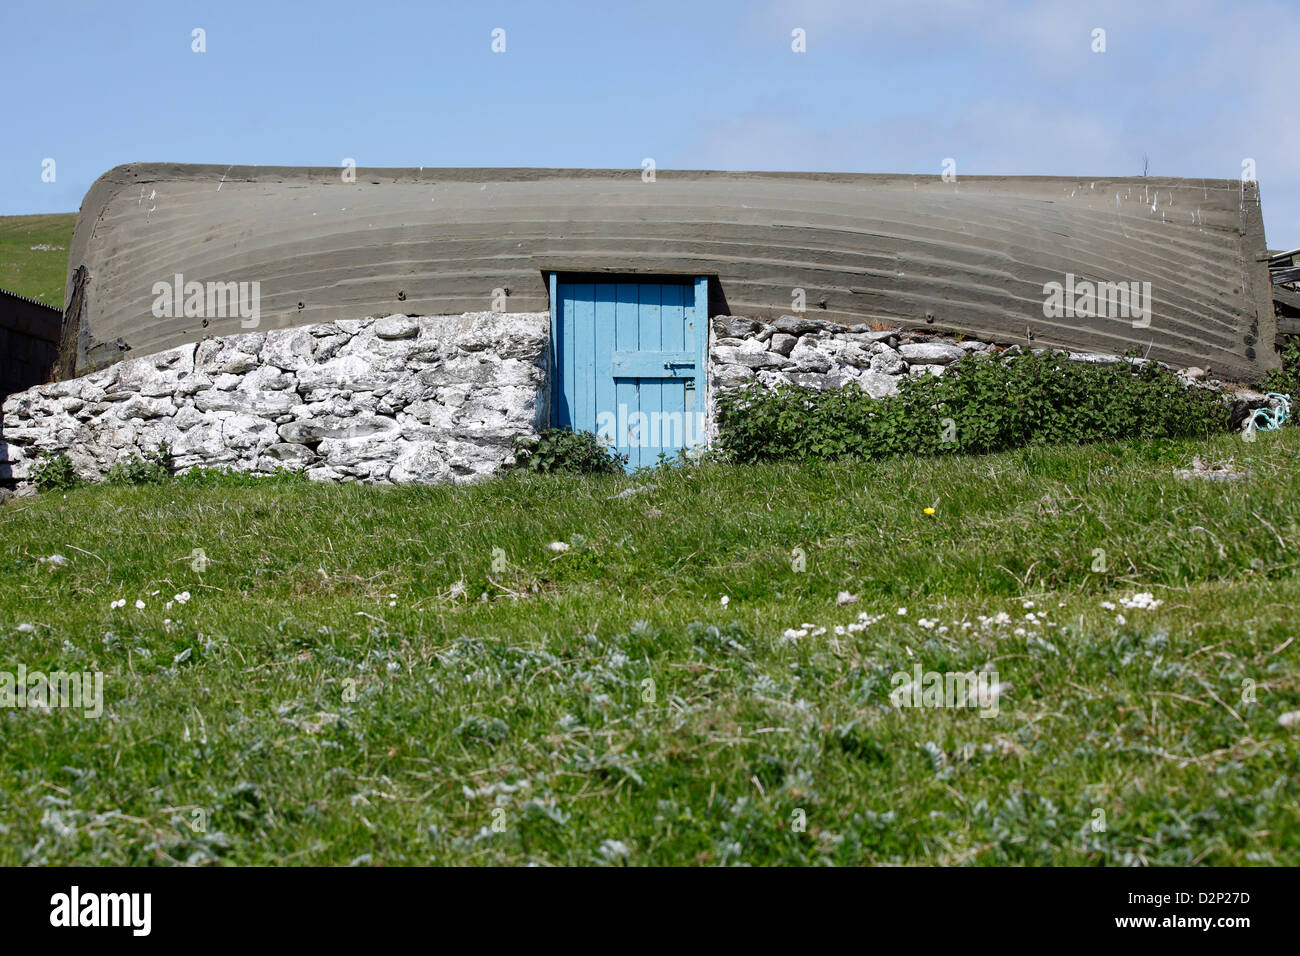 Barn with a roof made from a boat in the tiny settlement of Skaw on the island of Unst. Stock Photo